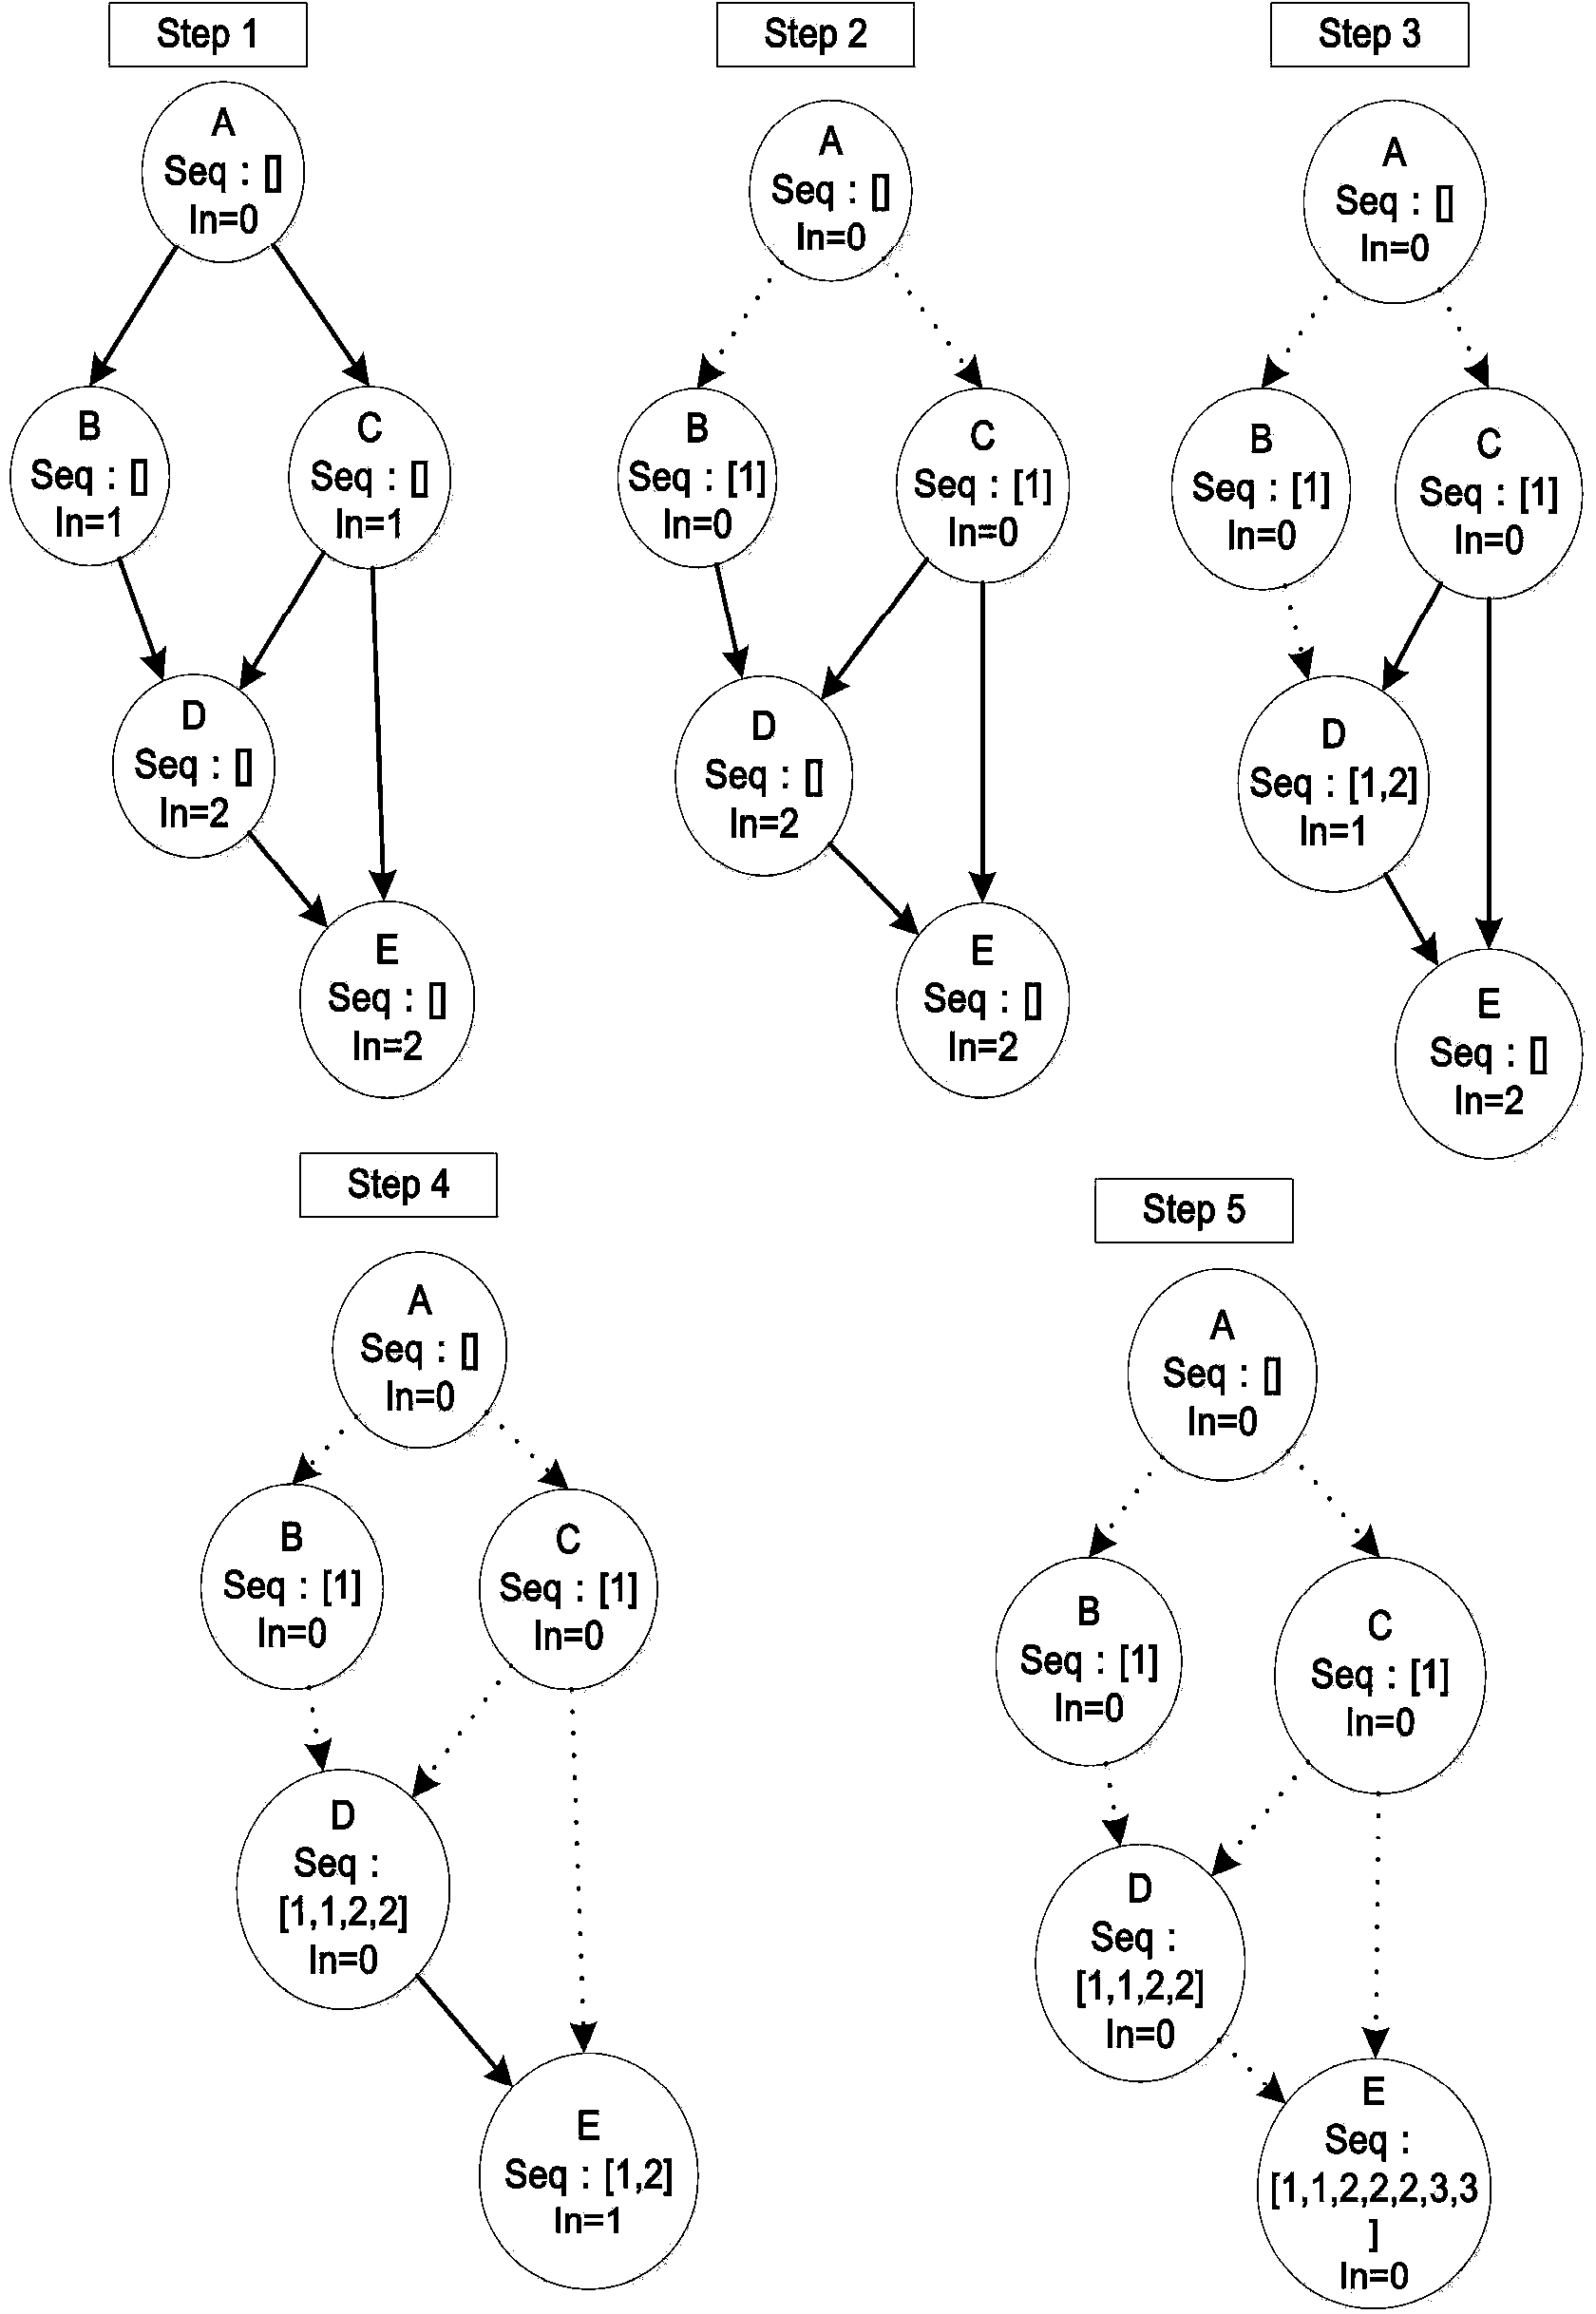 Android malicious software detection method based on method call graph